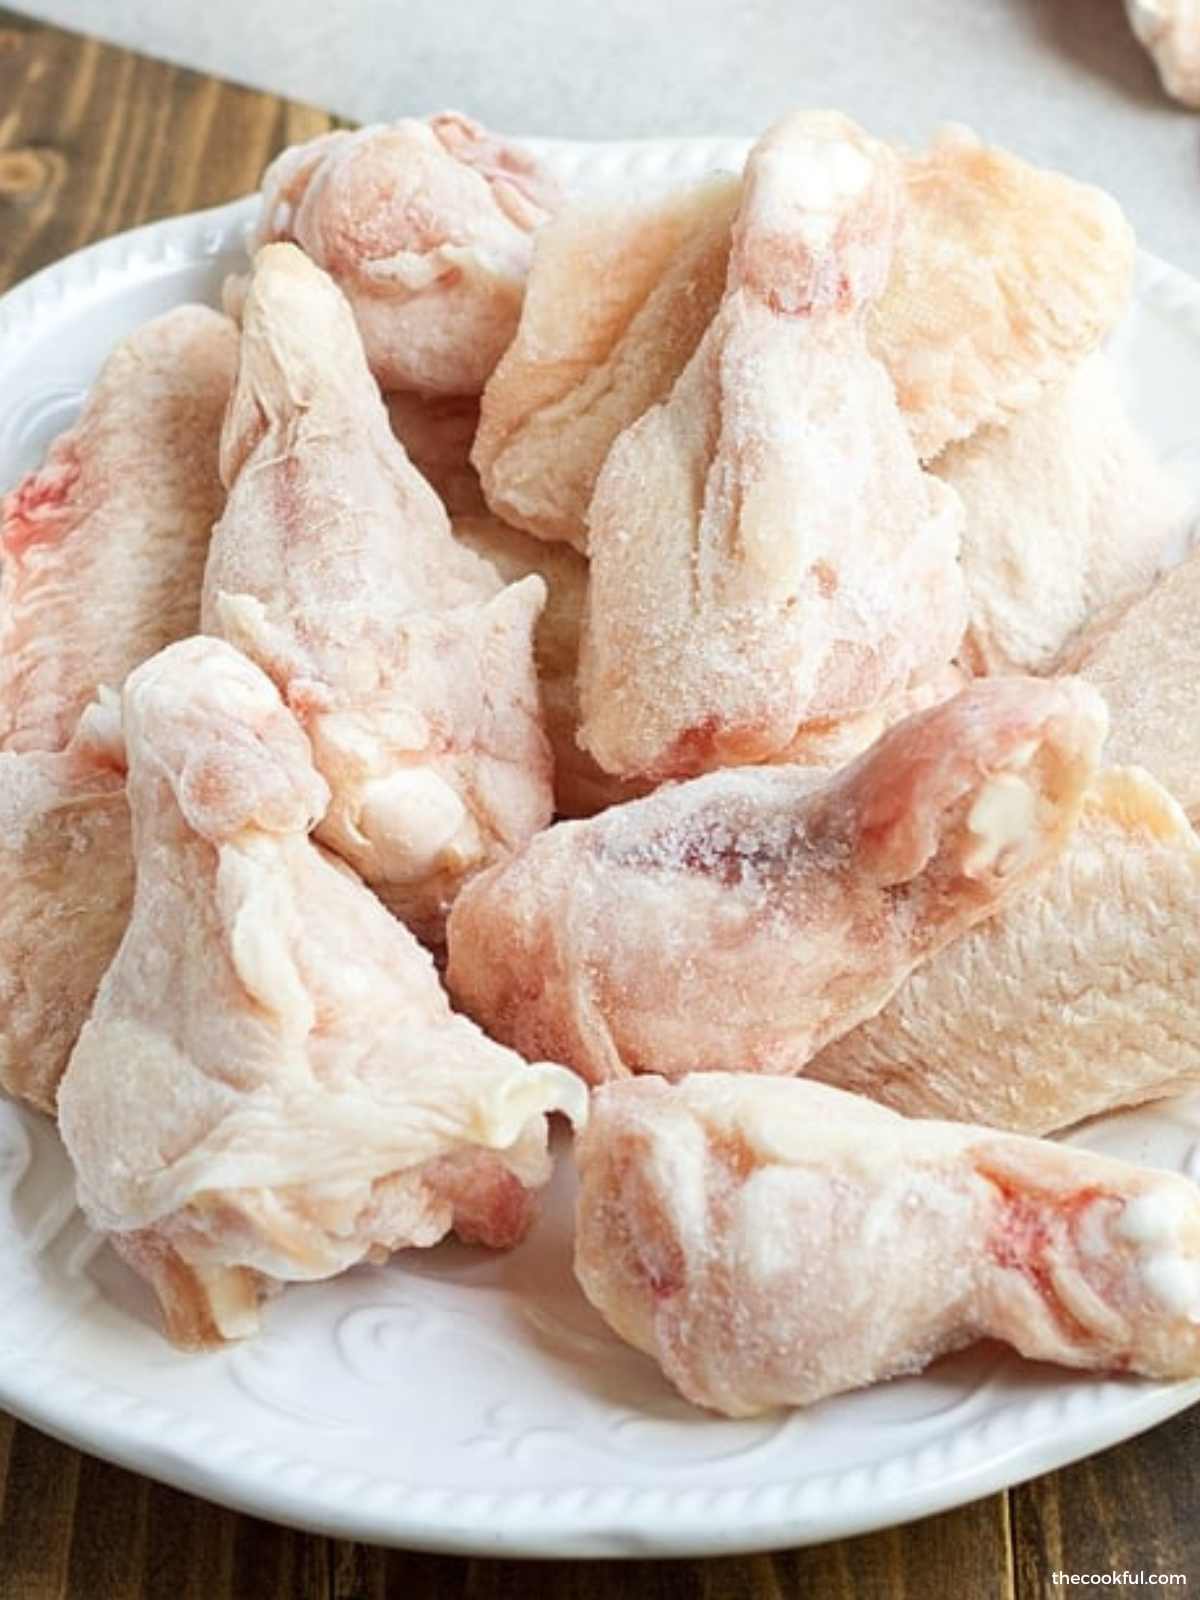 How Chicken Cuts Impact Freezing Times